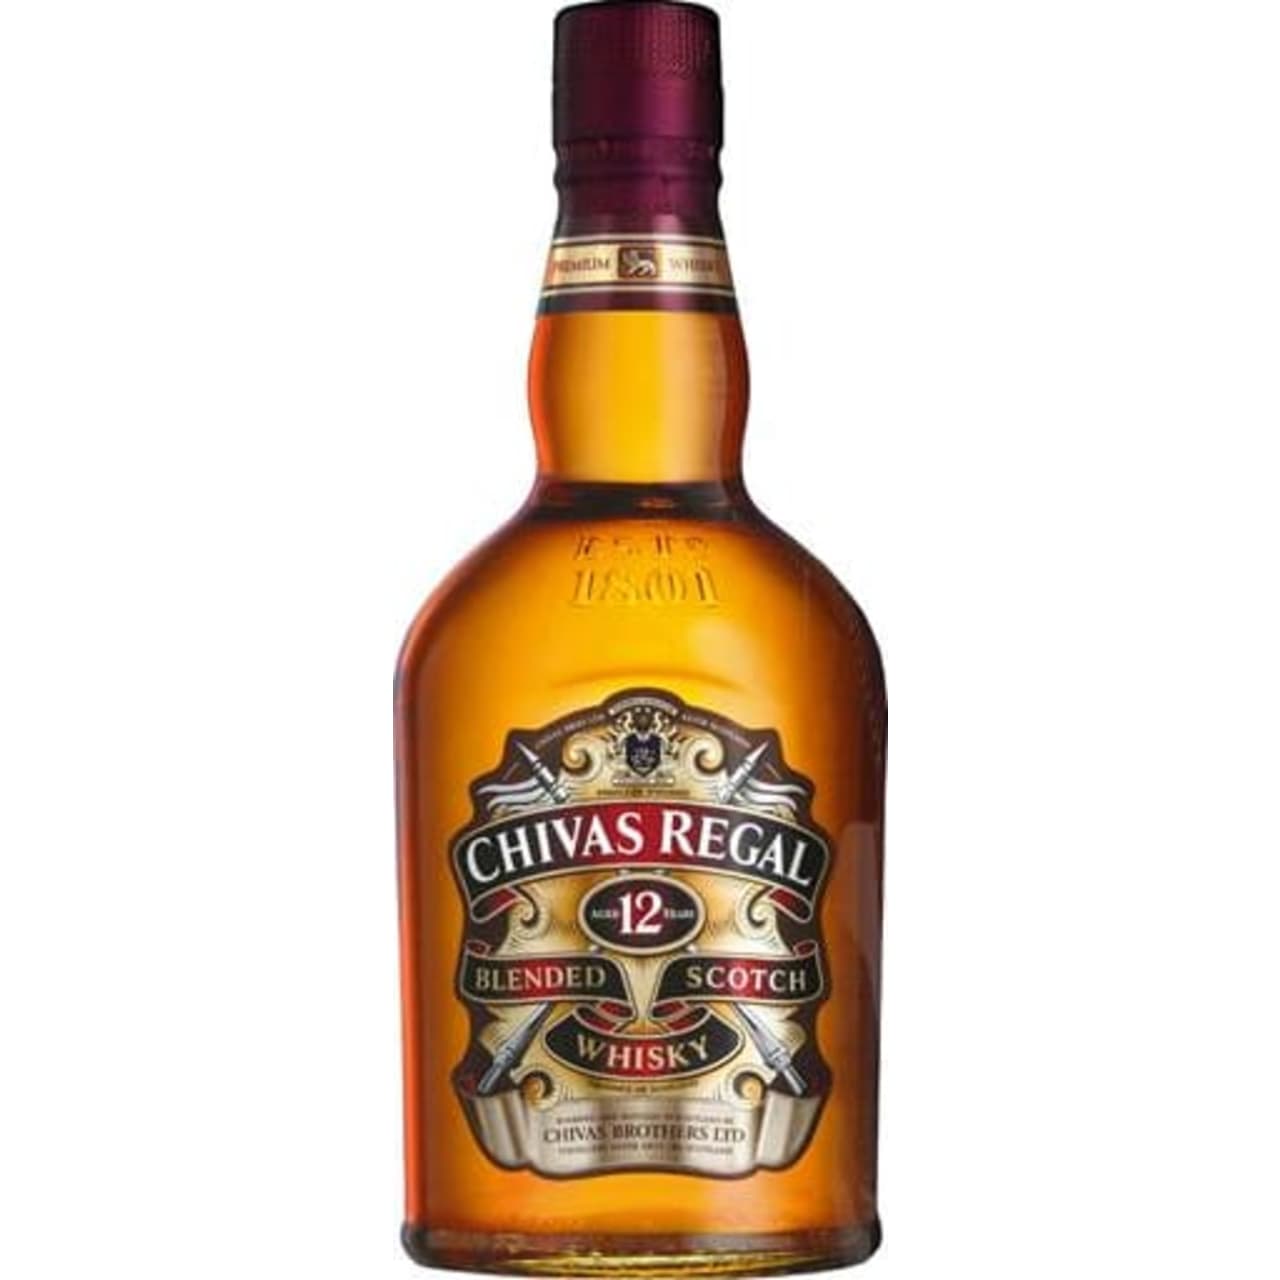 Distinctive Speyside flavours of crisp orchard fruits and wild heather can be found in every sip of Chivas 12, with a rich and generous taste.